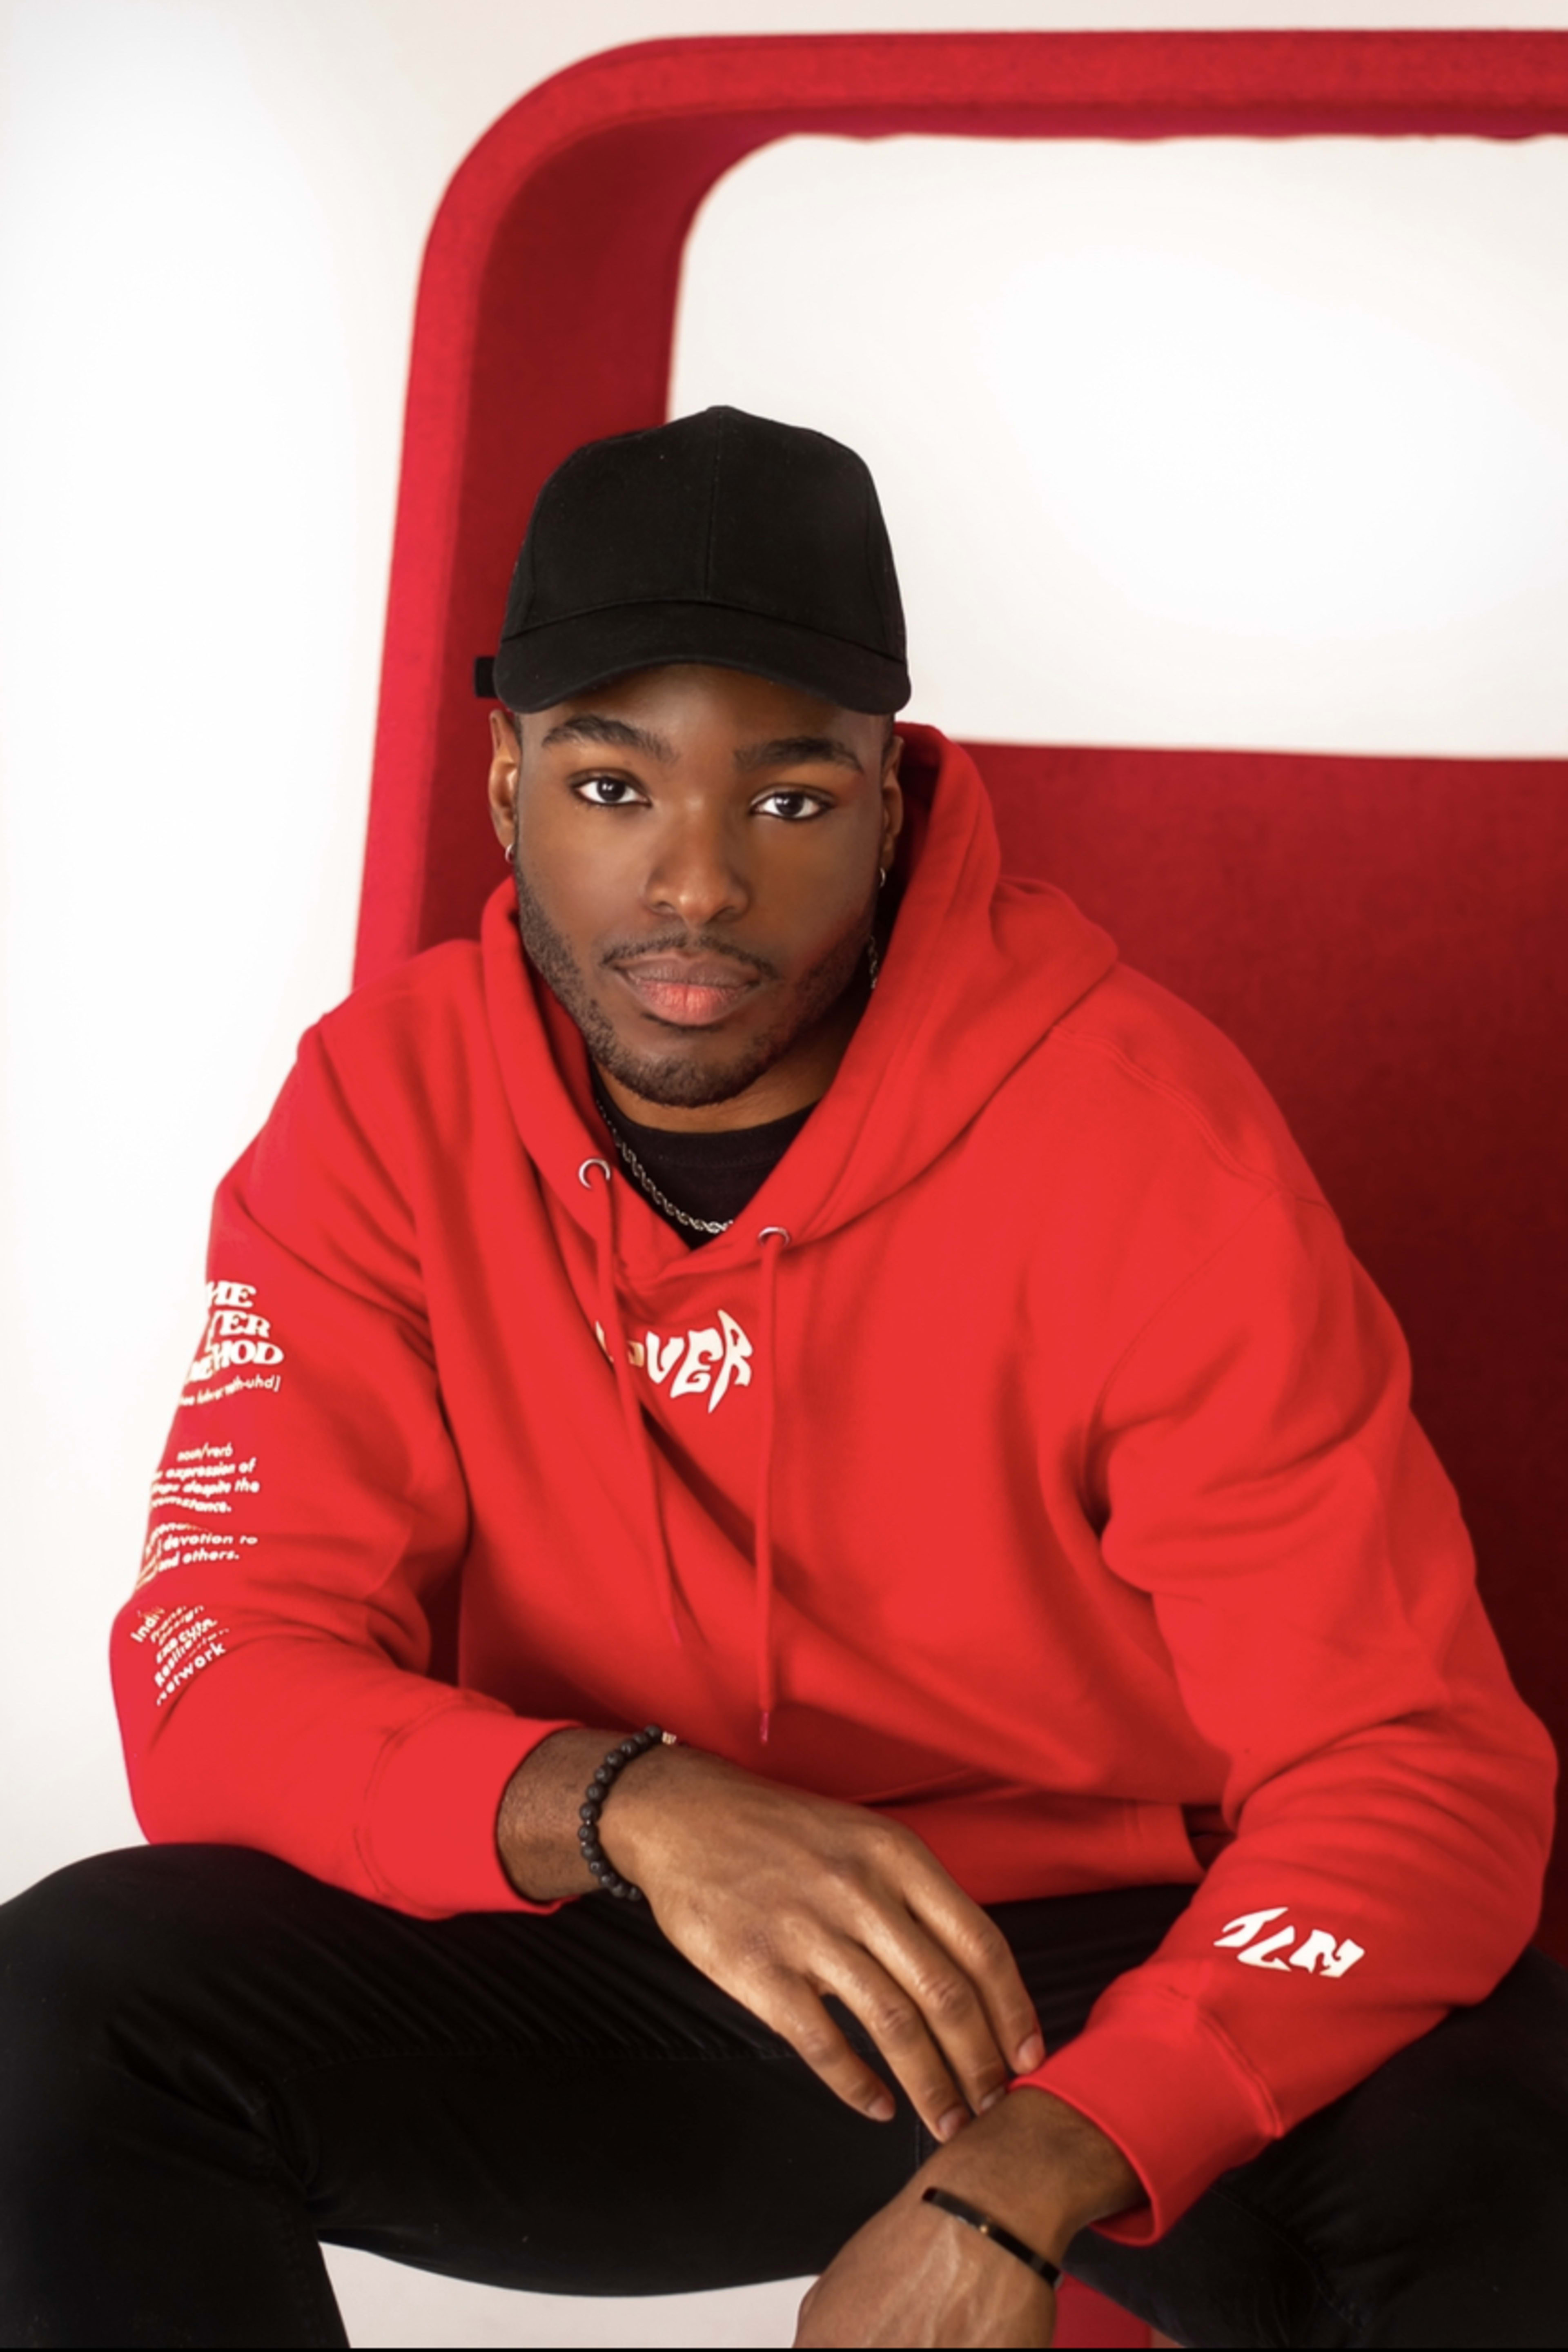 A man in a red hoodie posing for a photo shoot on a red chair.